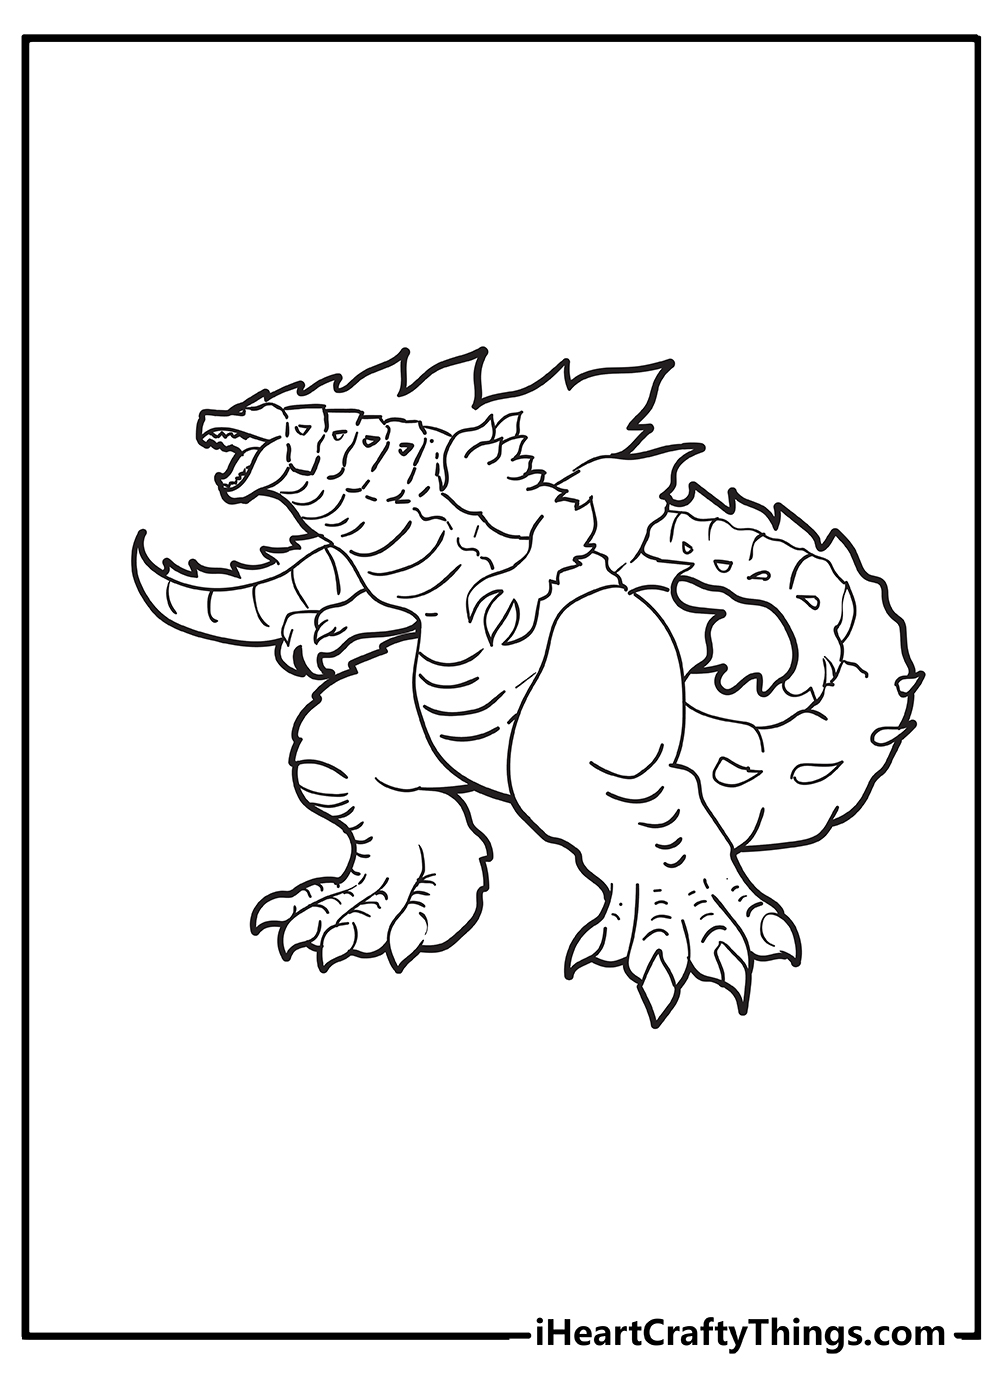 Godzilla Coloring Pages for adults free printable